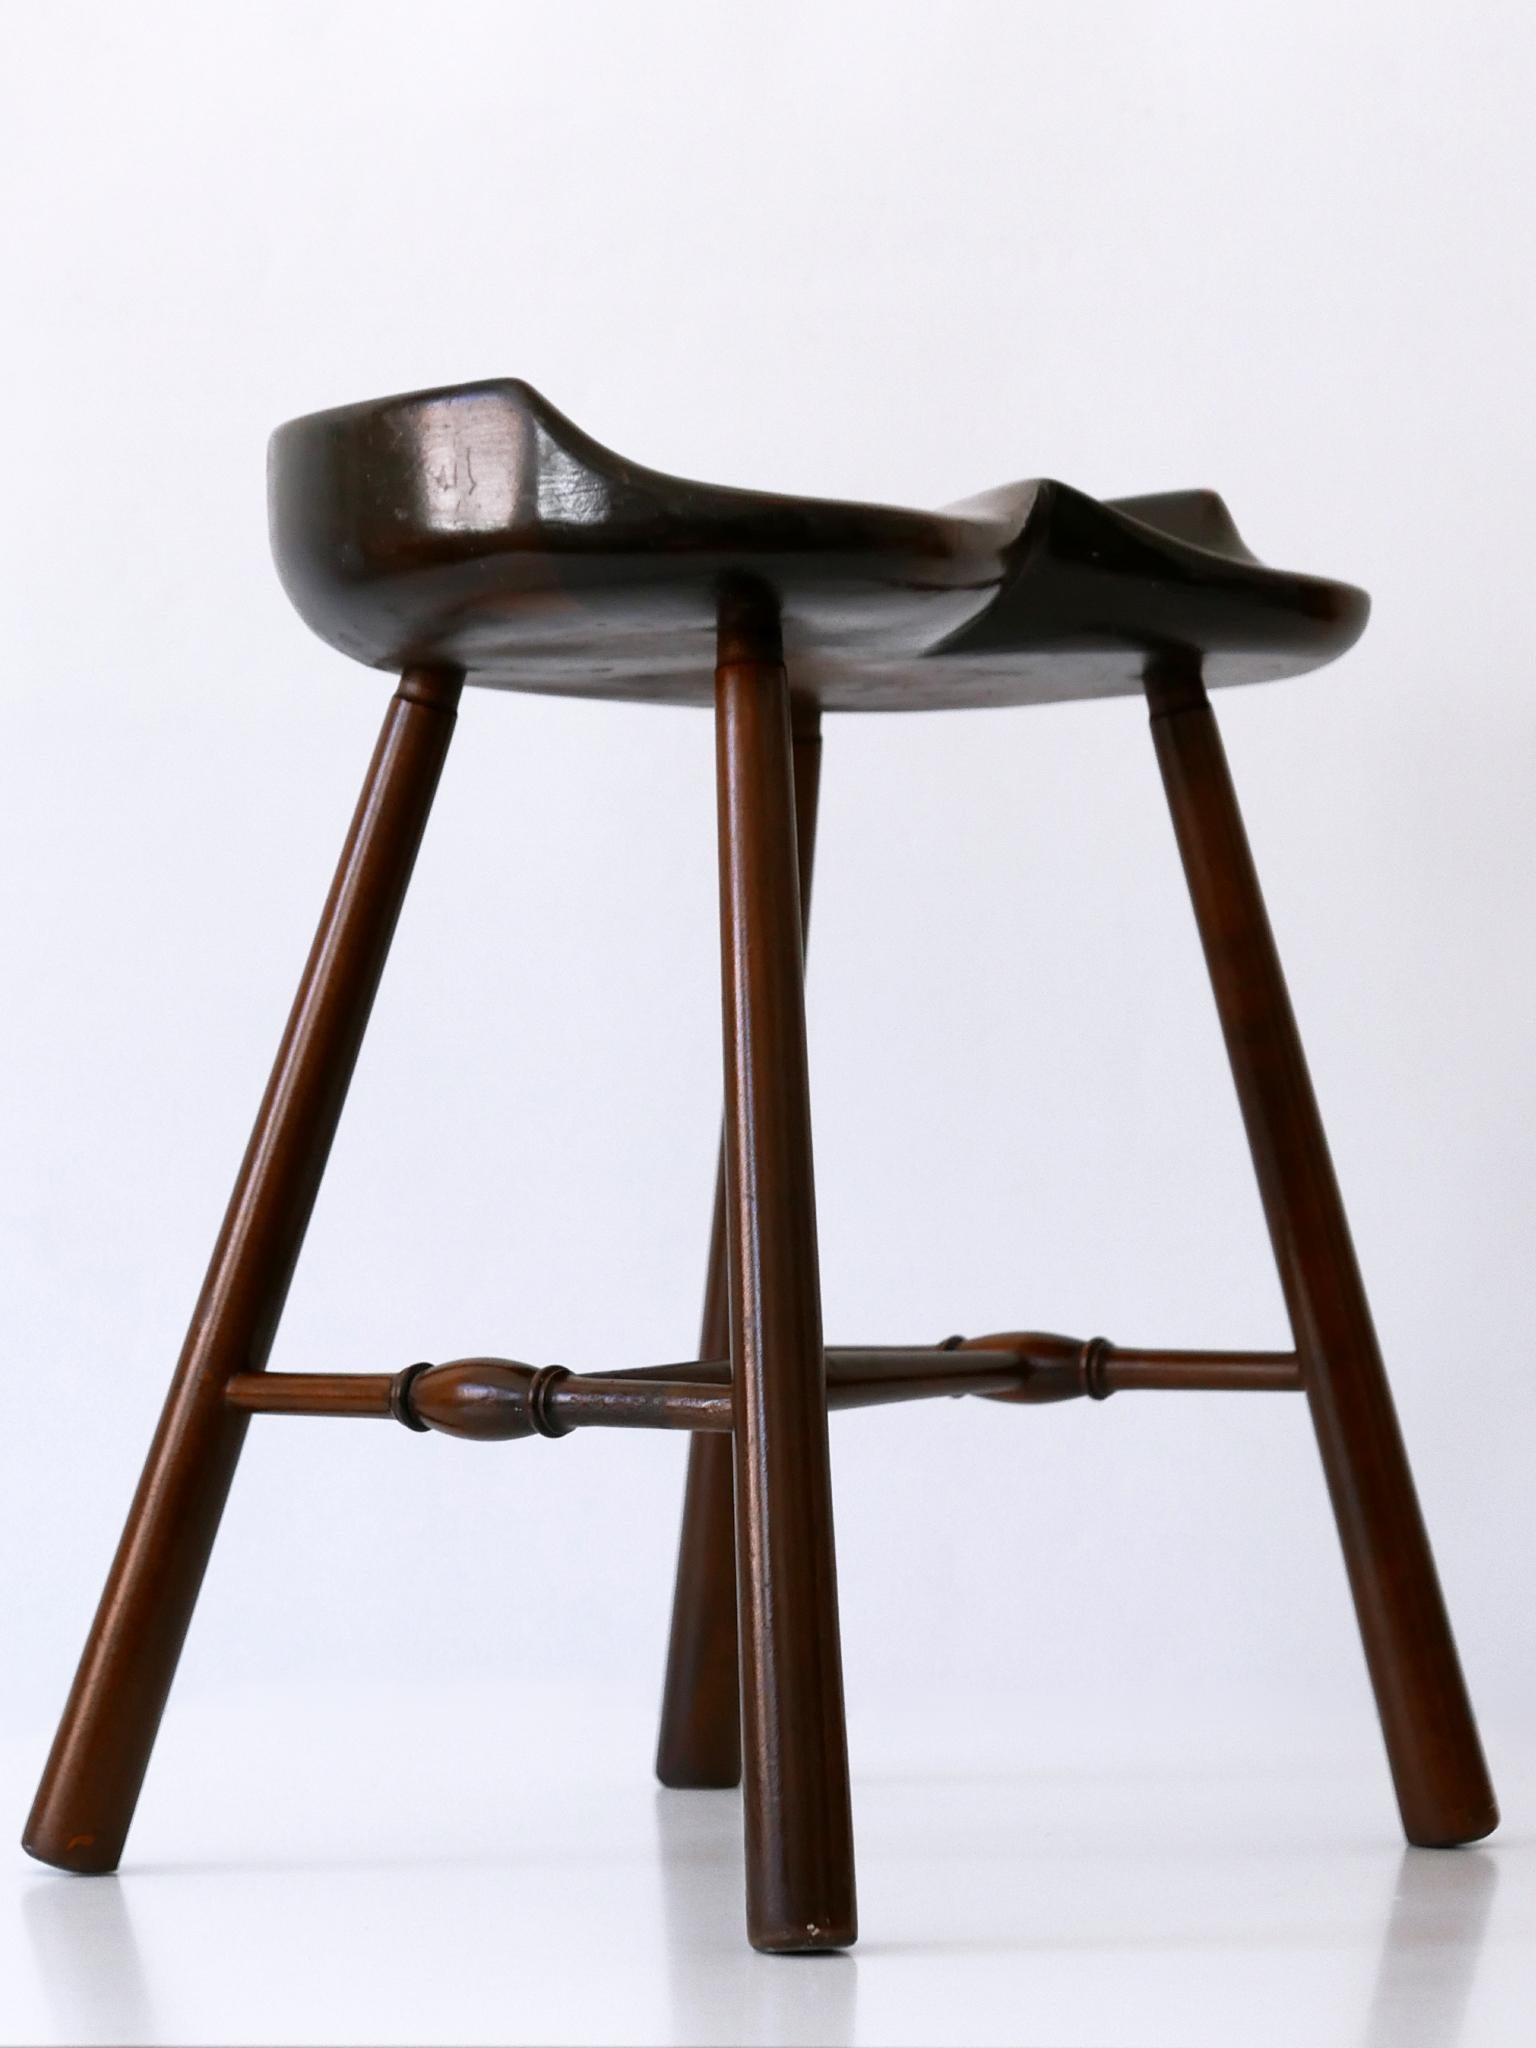 Sculptural Mid-Century Modern Solid Wood Stool Germany 1950s For Sale 5